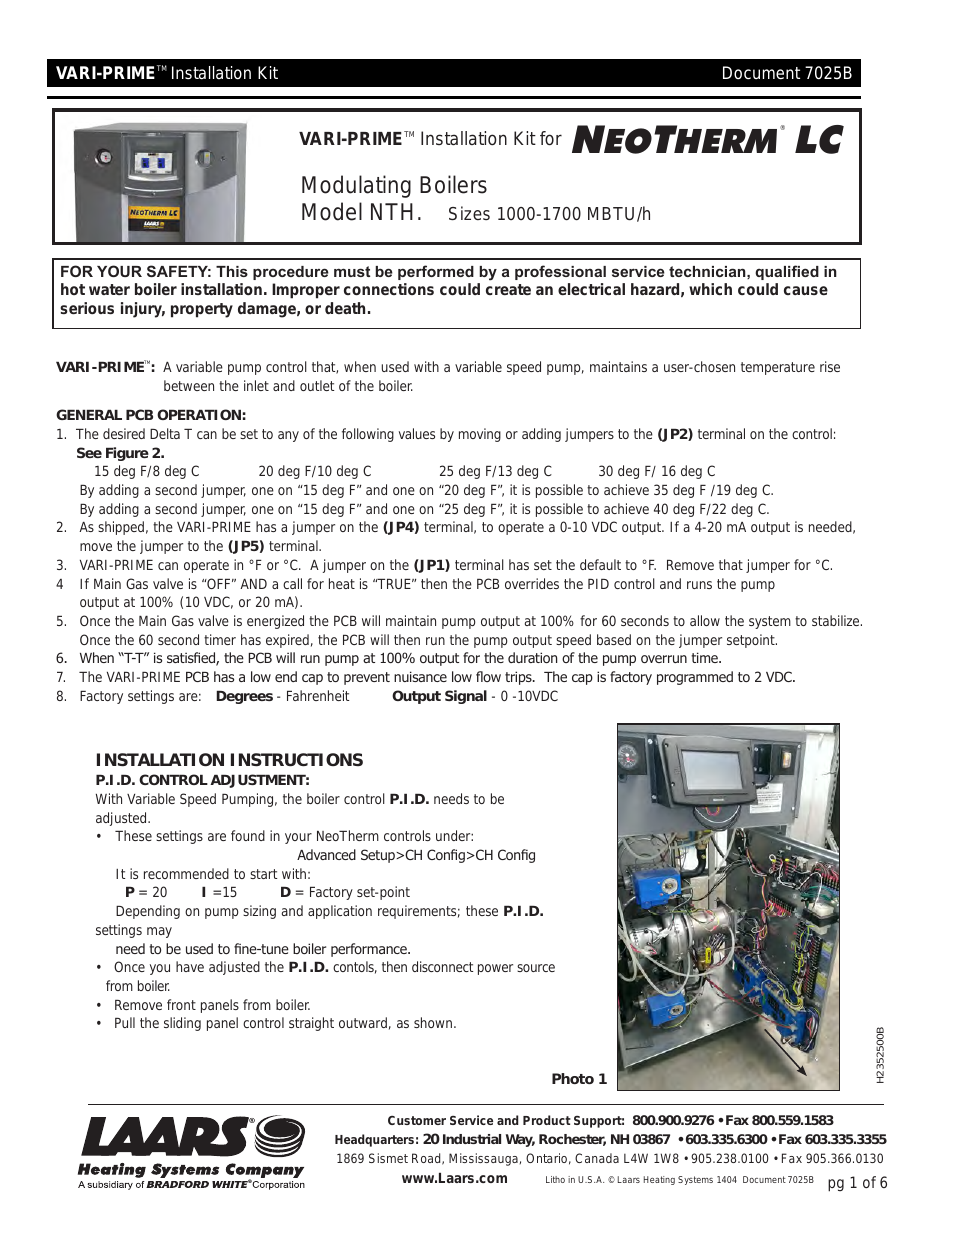 NeoTherm LC NTH (Sizes 1000-1700 MBTU/h) - Installation Manual